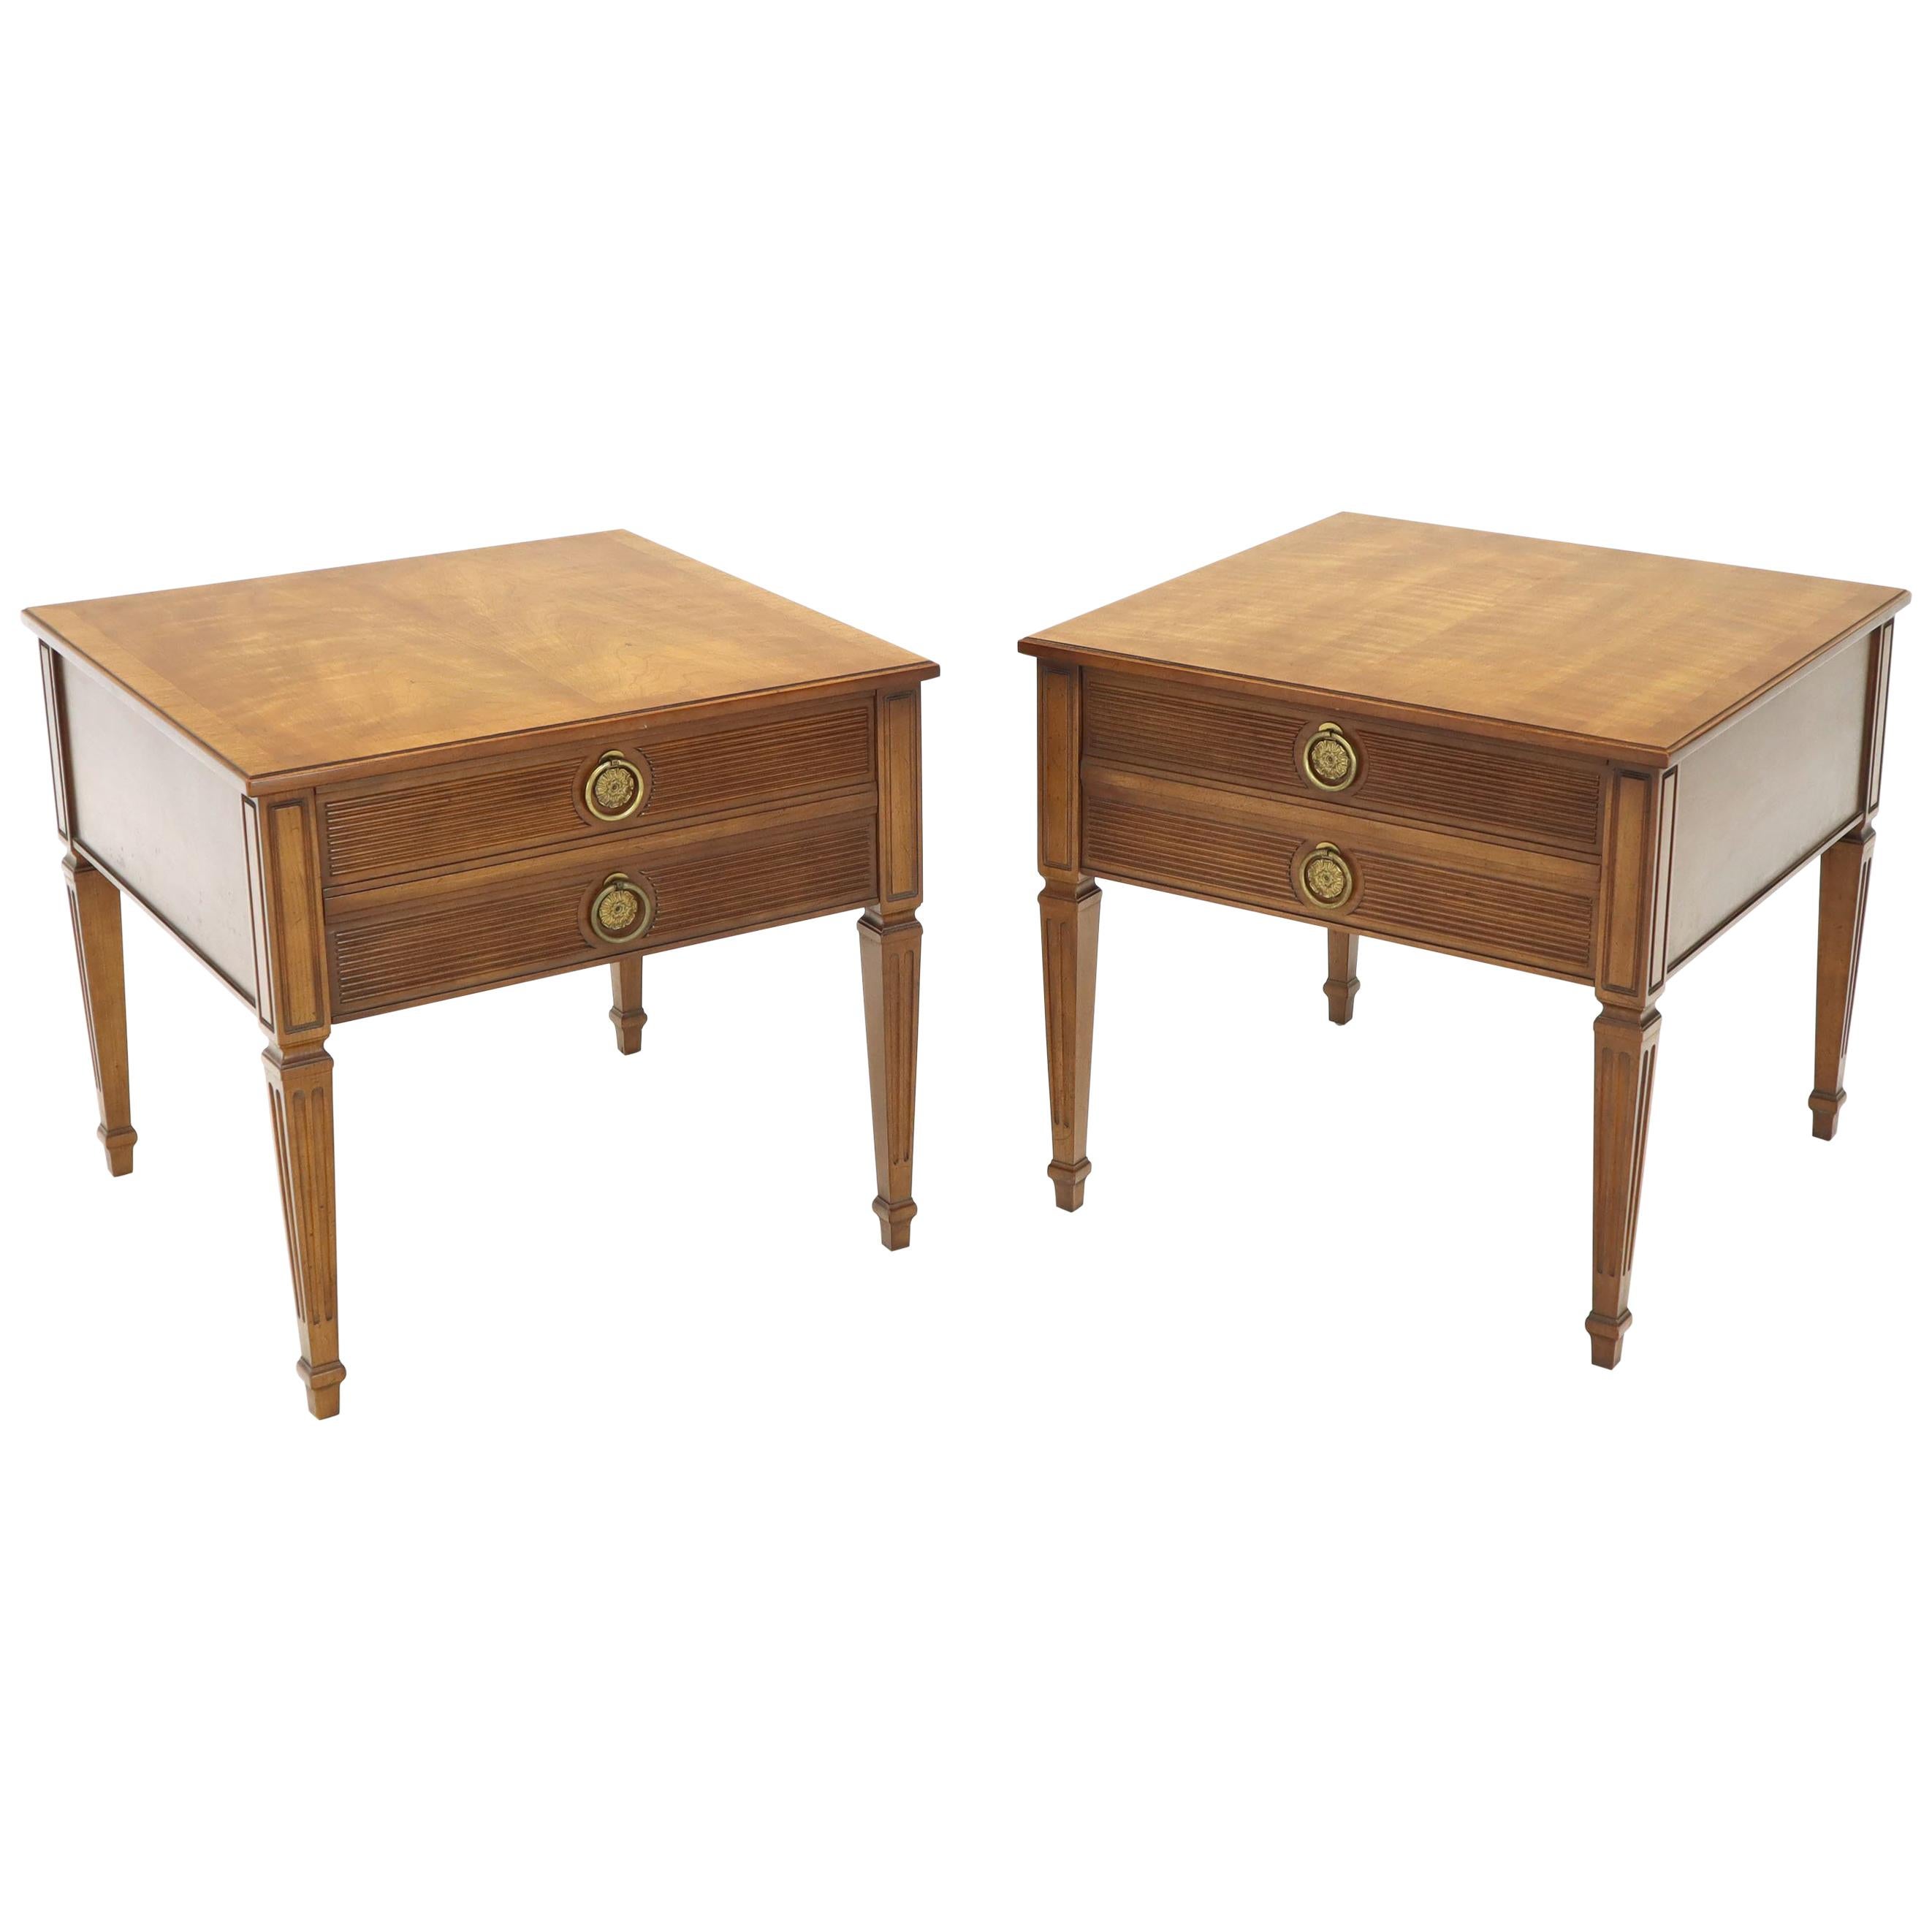 Pair of Square Fruitwood End lamp Tables with Brass Pulls by Henredon